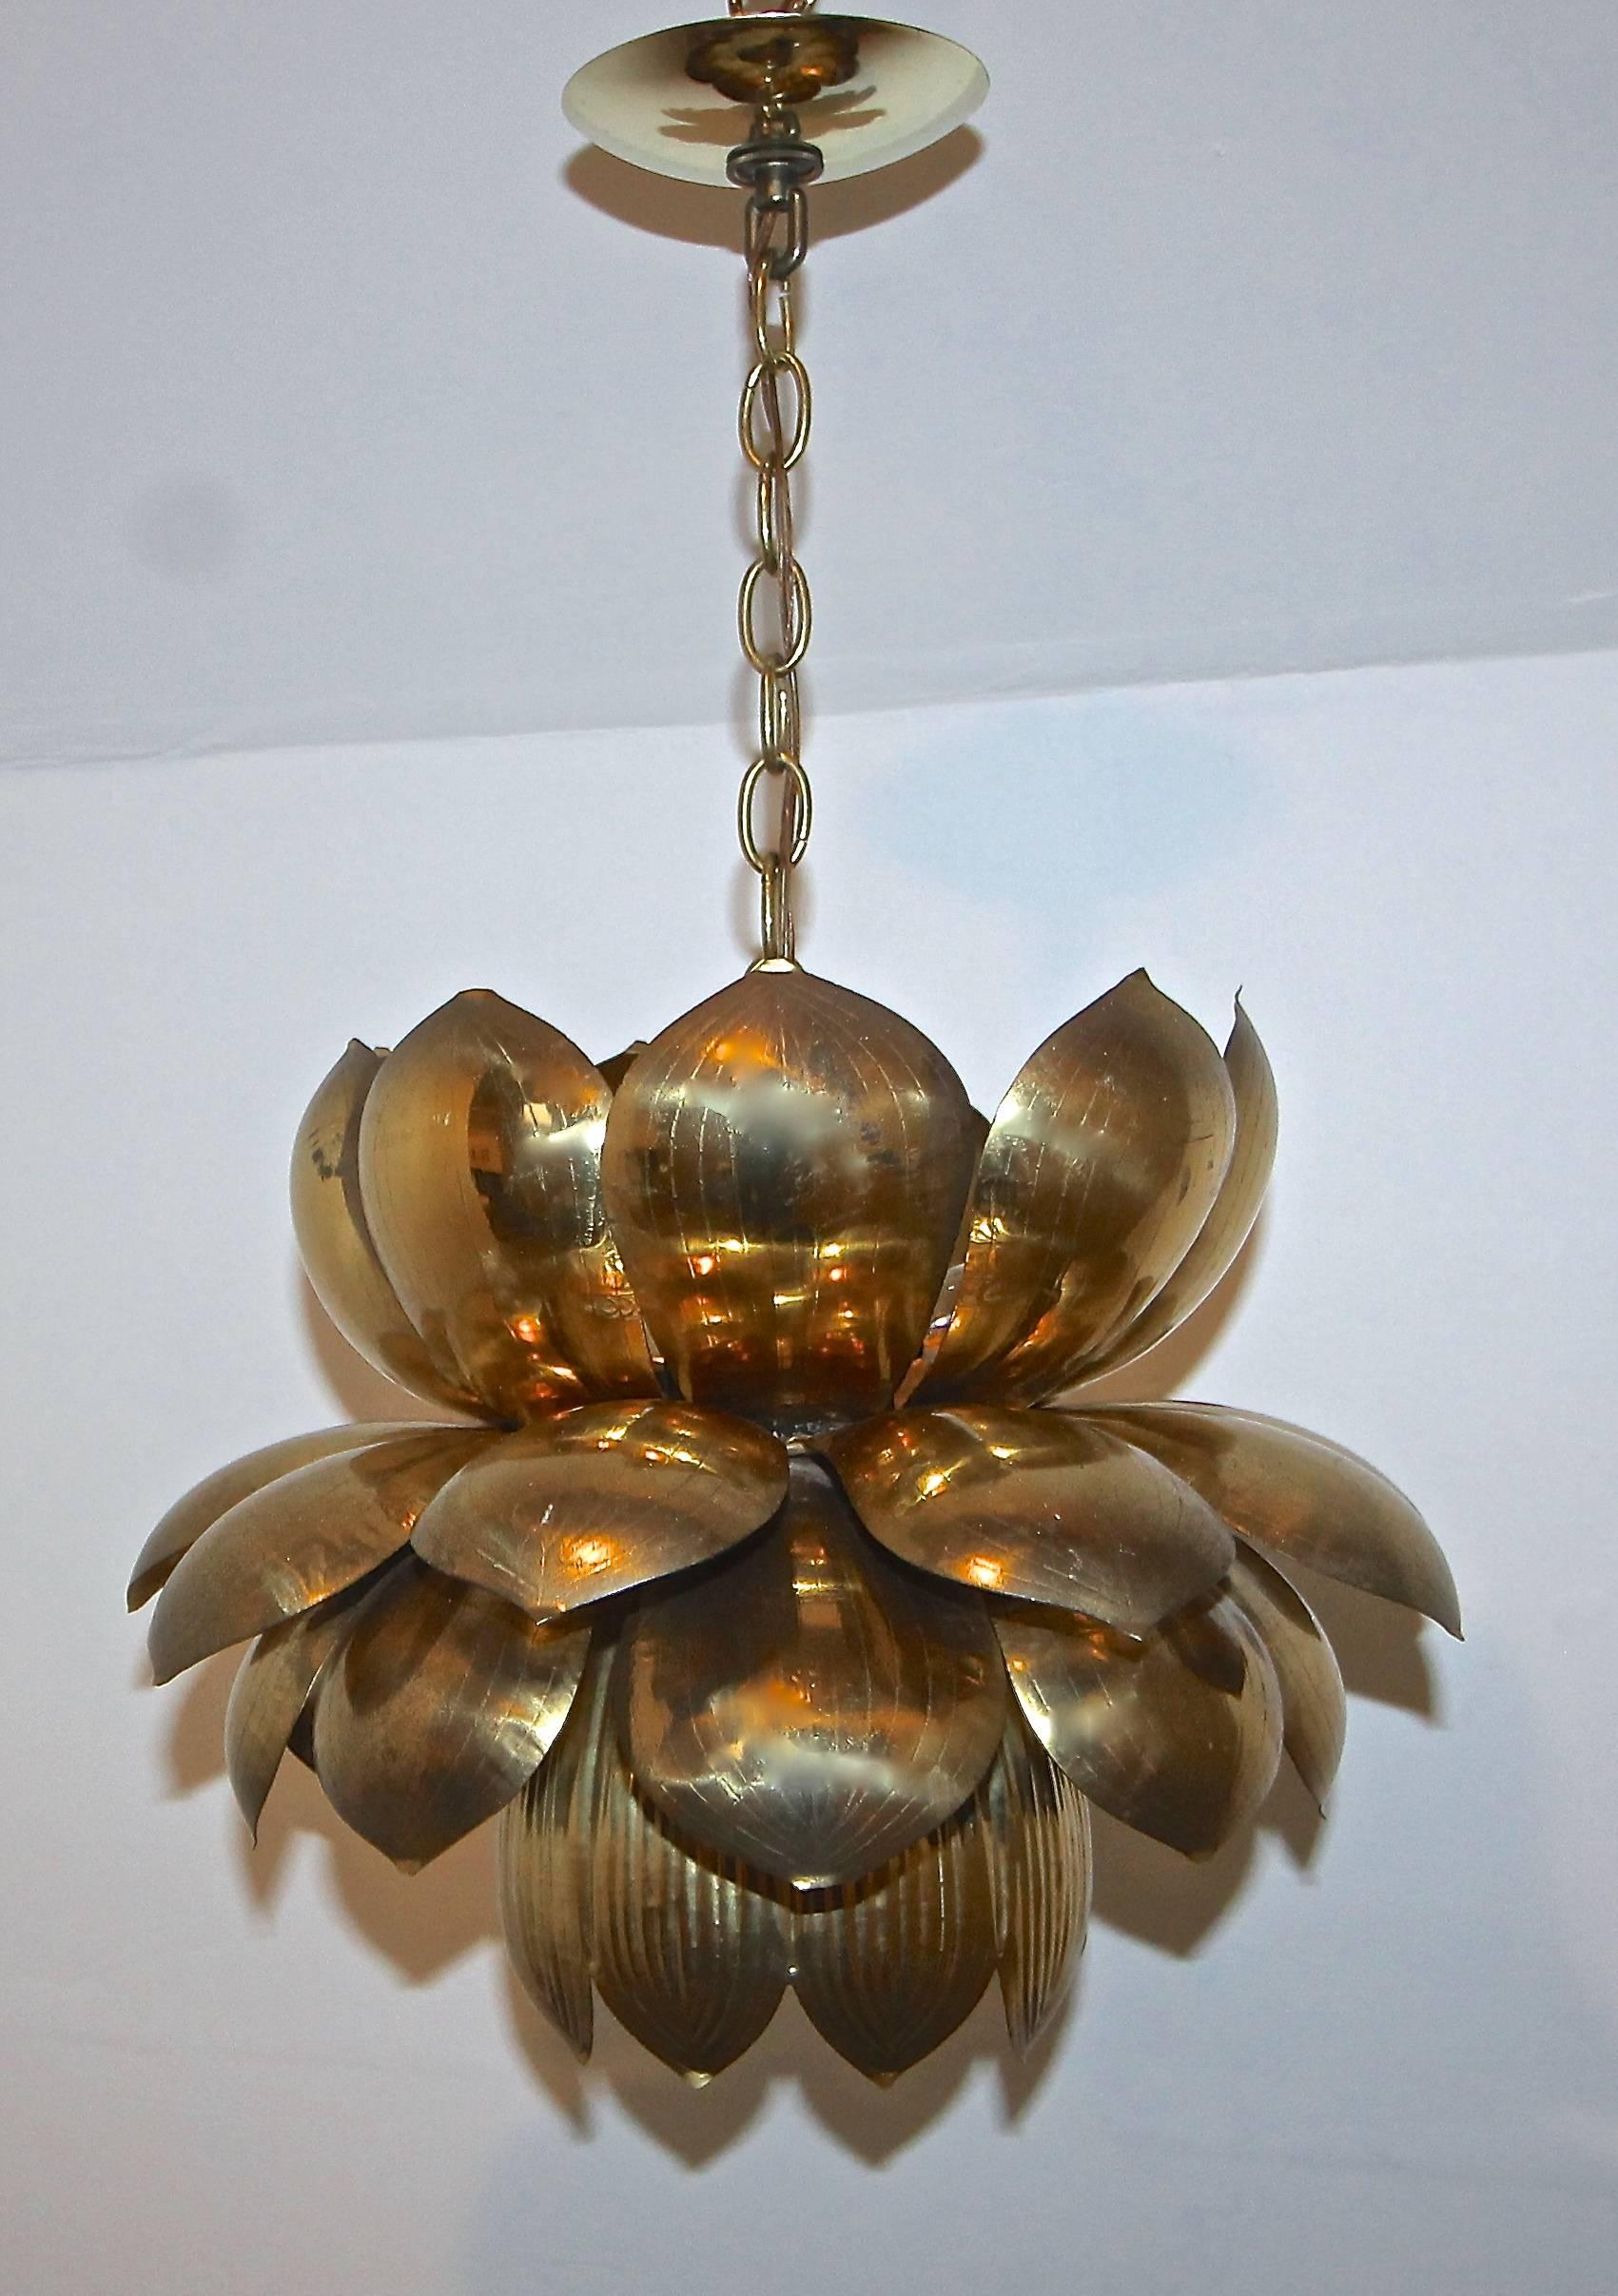 Large brass lotus blossom light pendant or chandelier made by the Feldman Company, Los Angeles. The lower light uses 1 - 60 watt max "A" base bulb and the upper lights use 3 - 40 watt max candelabra base bulbs. The lotus flower is 15"